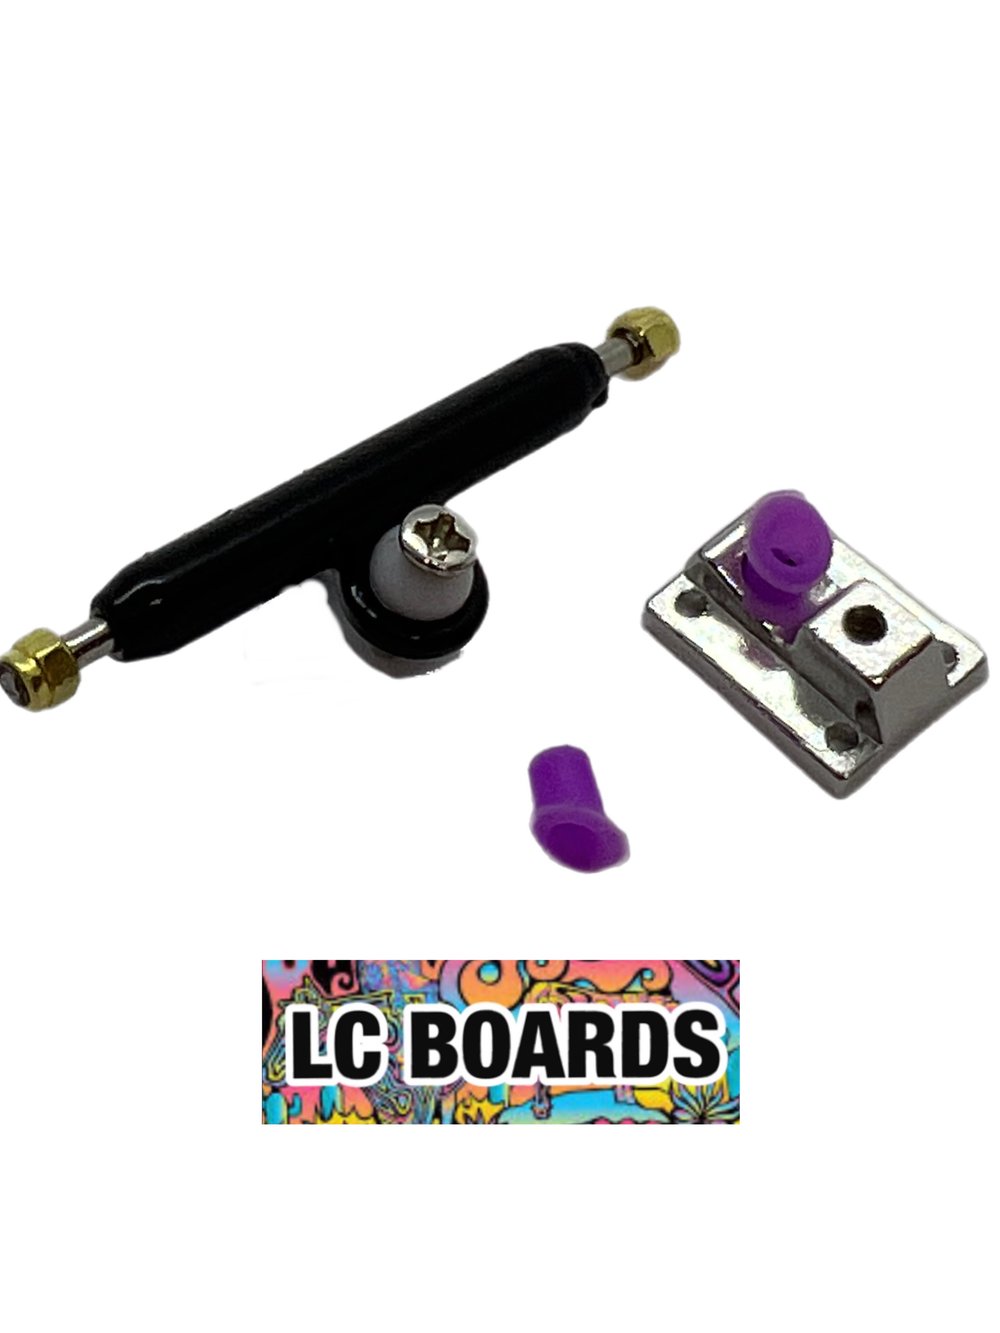 LC BOARDS FINGERBOARDS PIVOT CUPS TRUCK UPGRADE